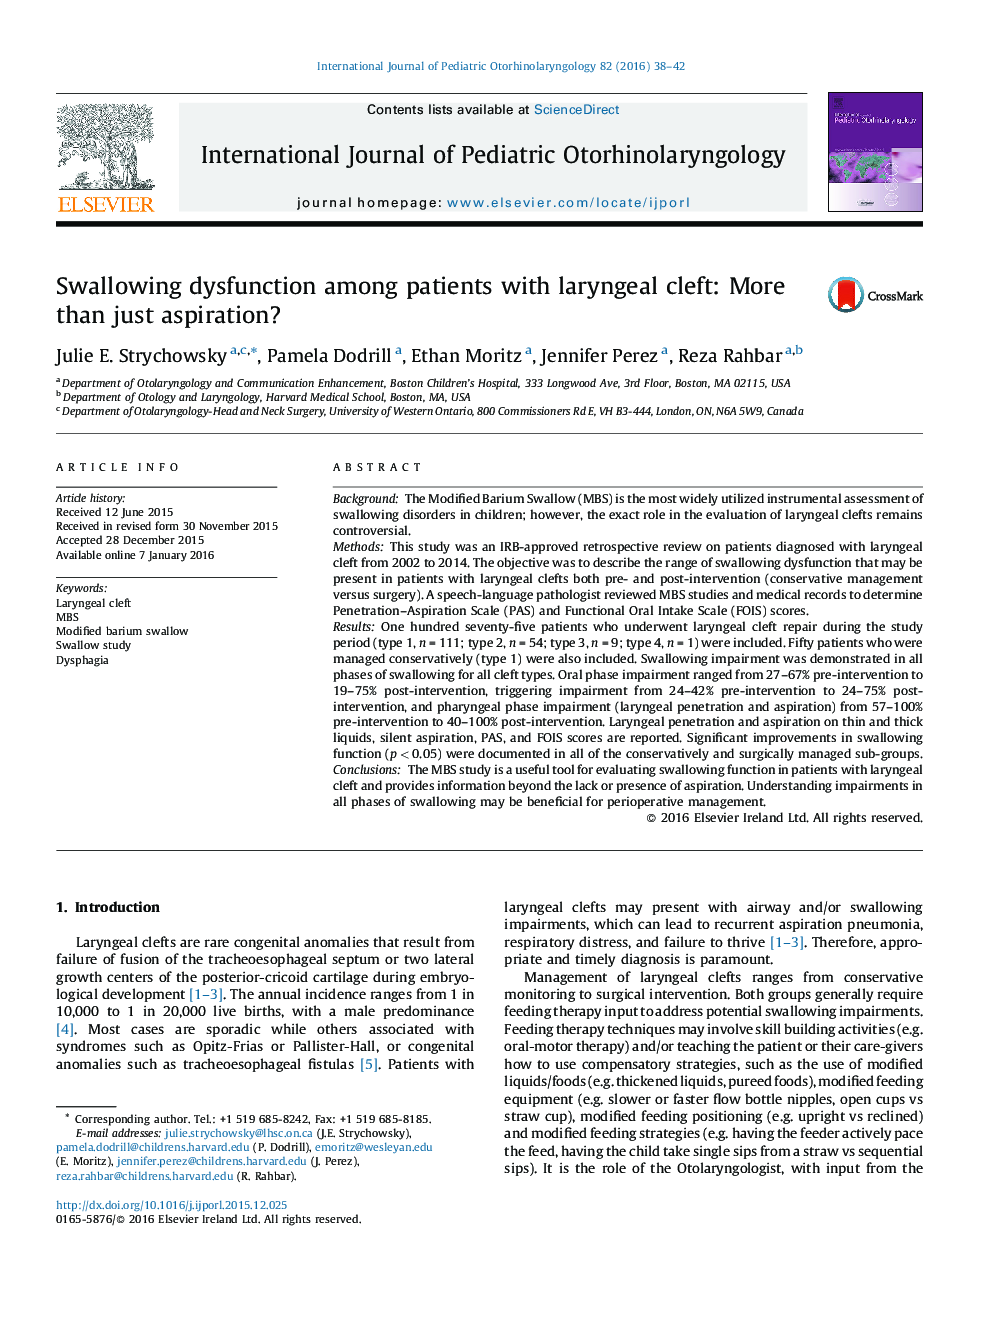 Swallowing dysfunction among patients with laryngeal cleft: More than just aspiration?